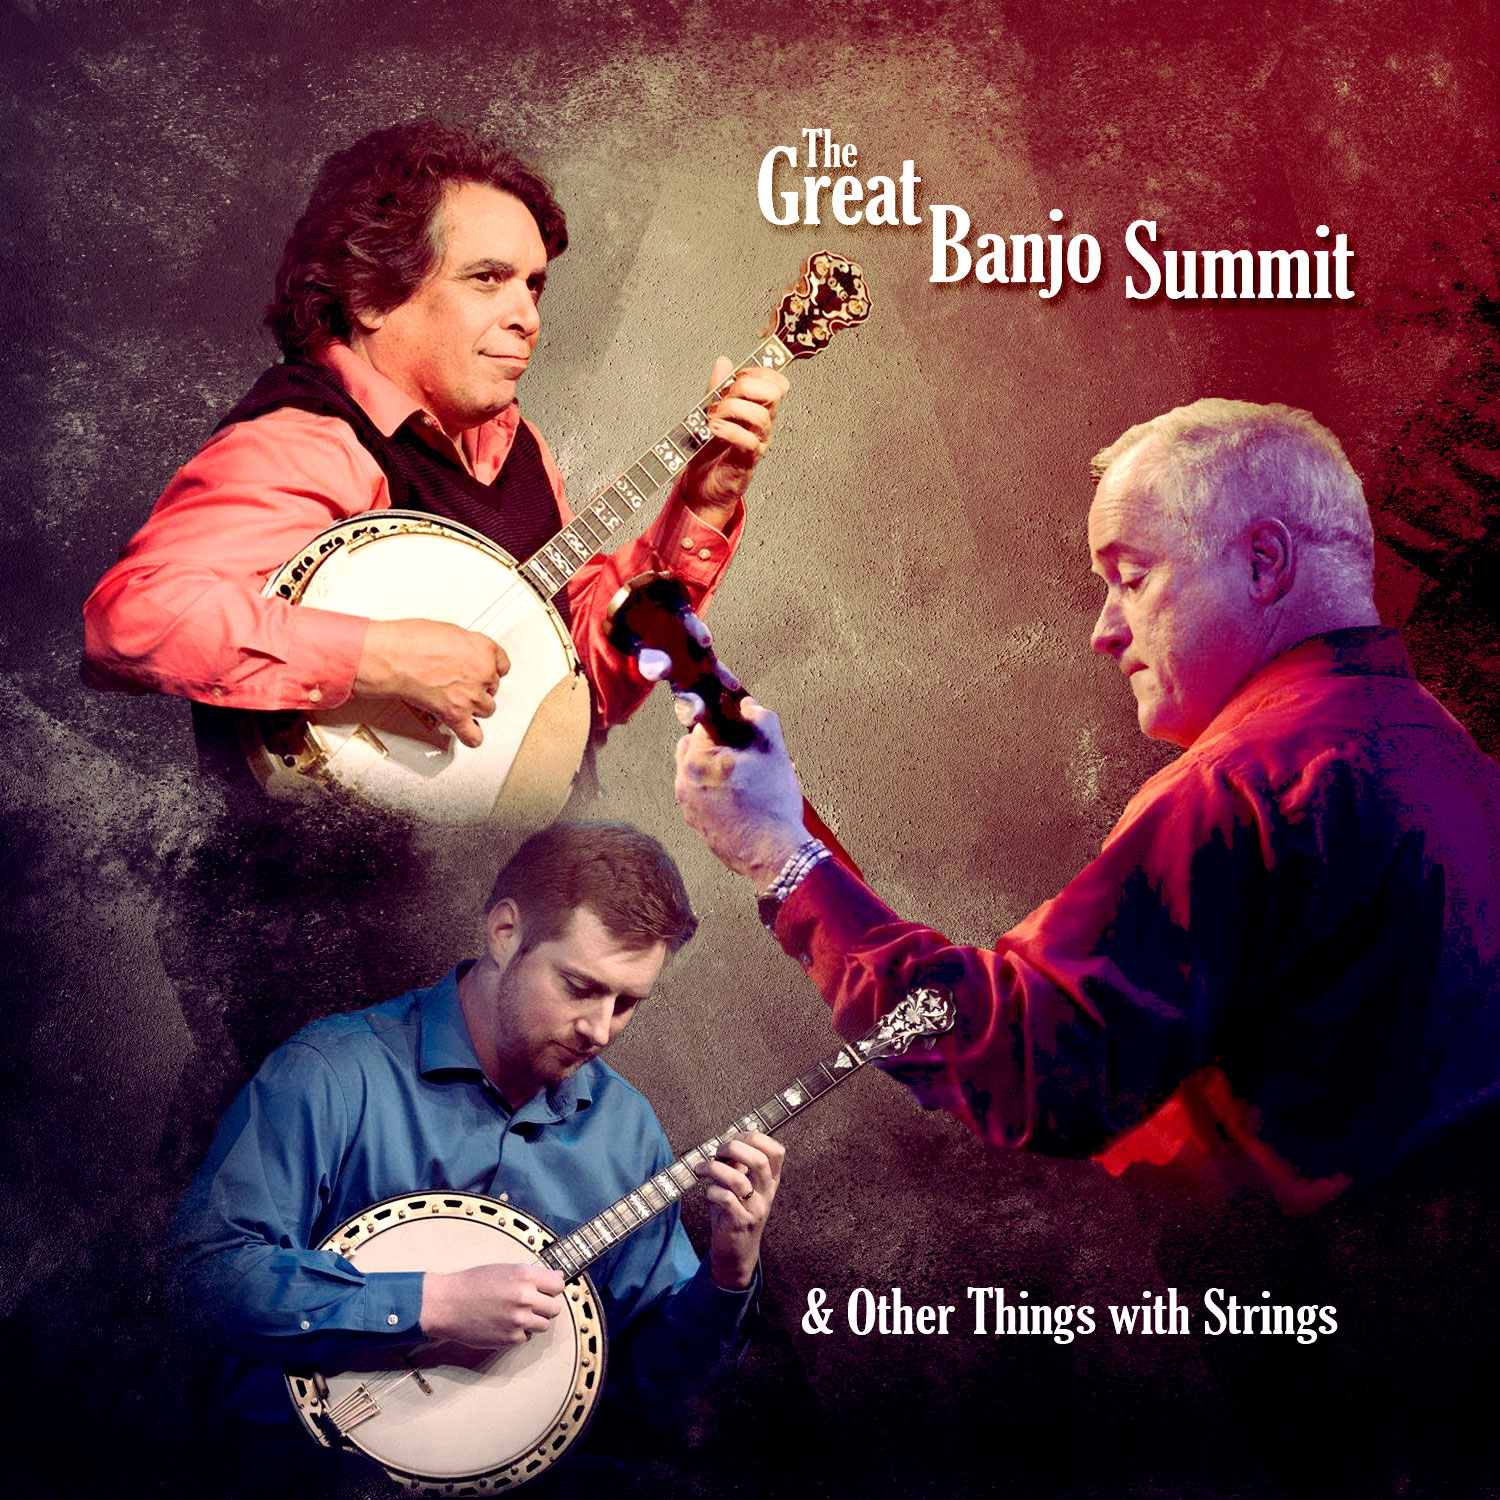 The Great Banjo Summit and other things with Strings CD cover